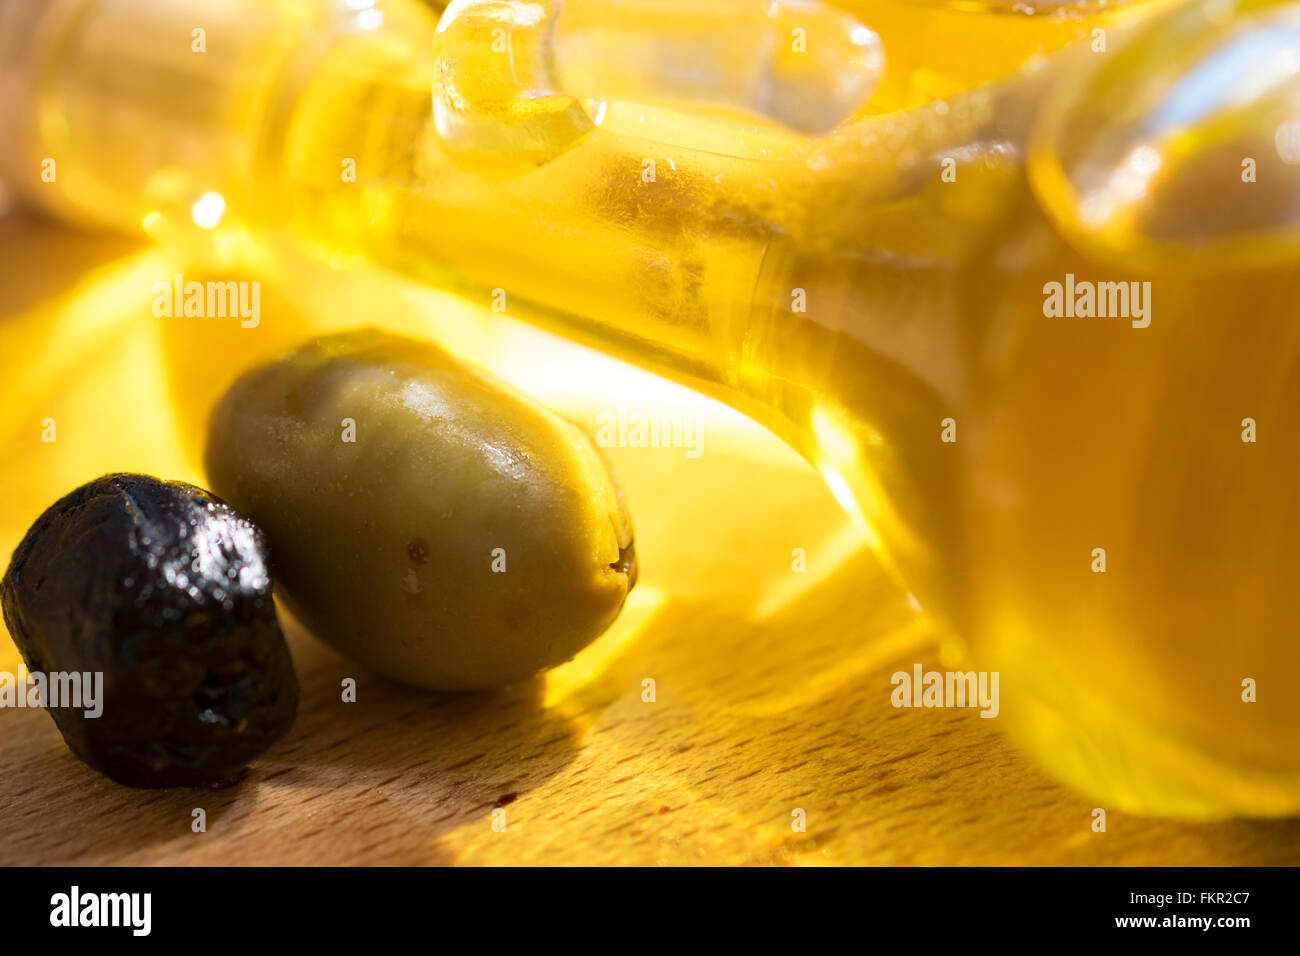 olive oil bottle with some olive Stock Photo